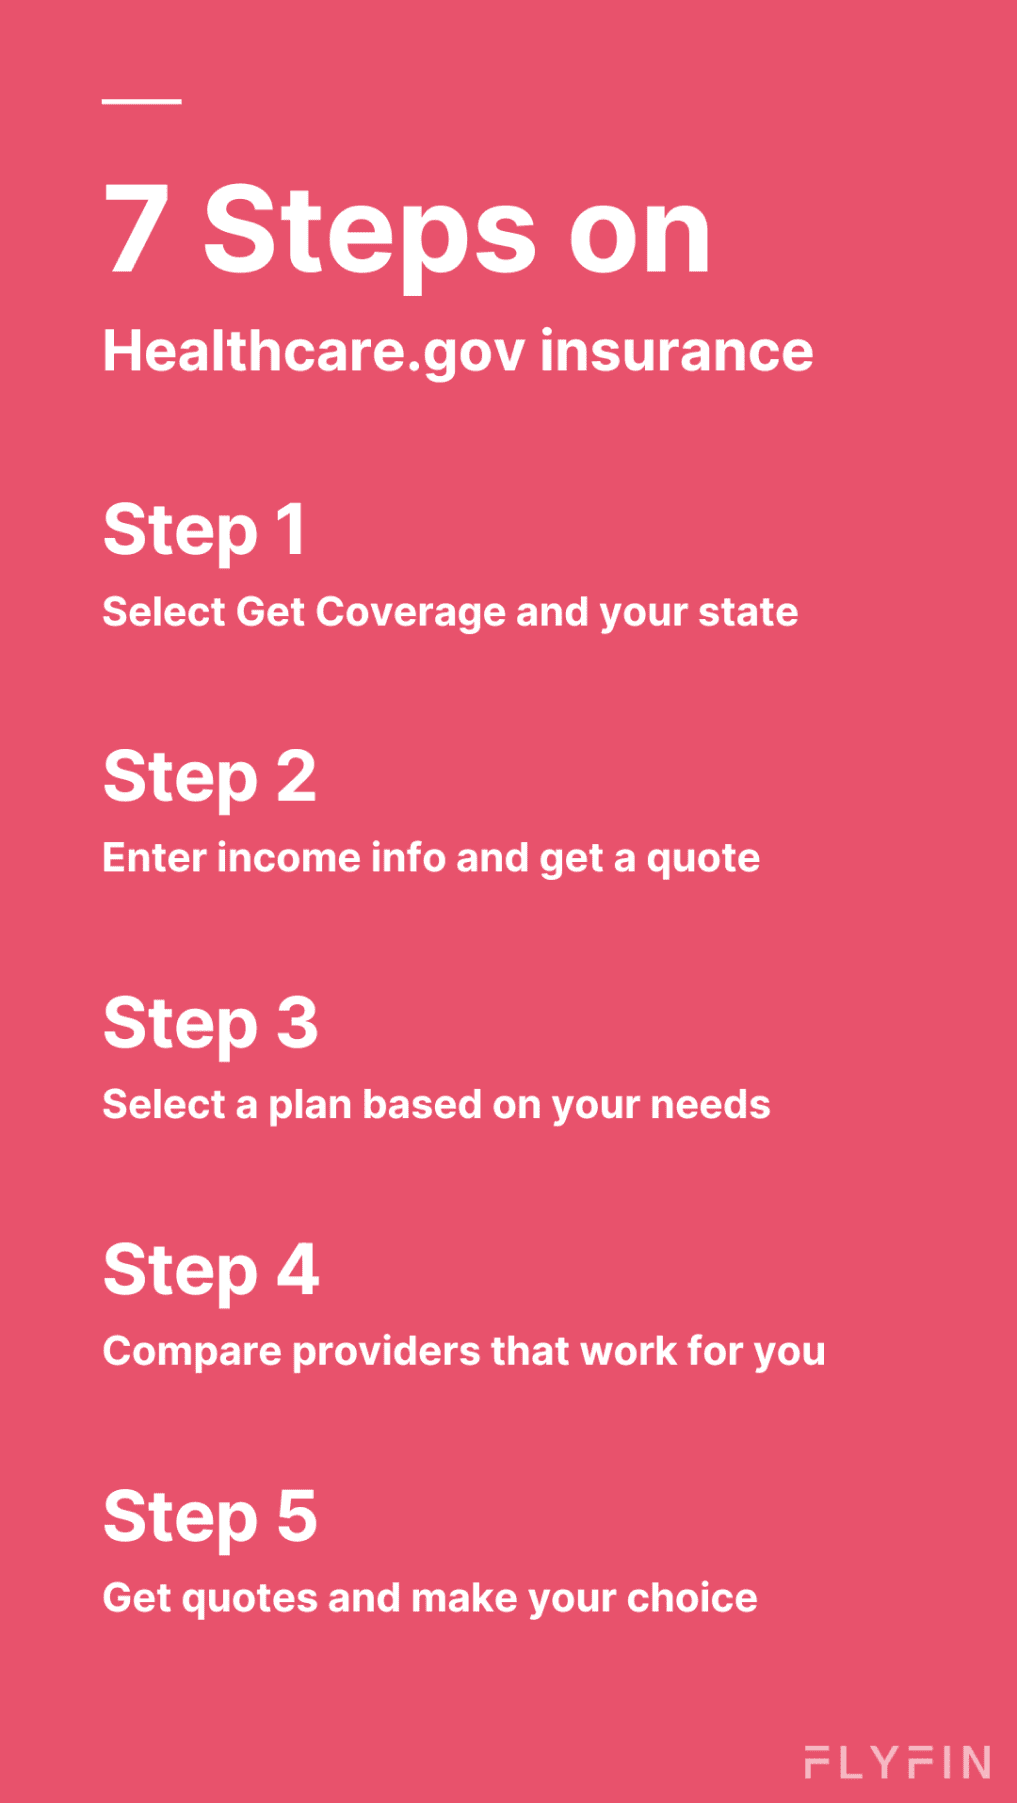 Image outlining 7 steps to get healthcare insurance on Healthcare.gov. Includes selecting state, comparing providers, choosing a plan, getting quotes, and entering income info.